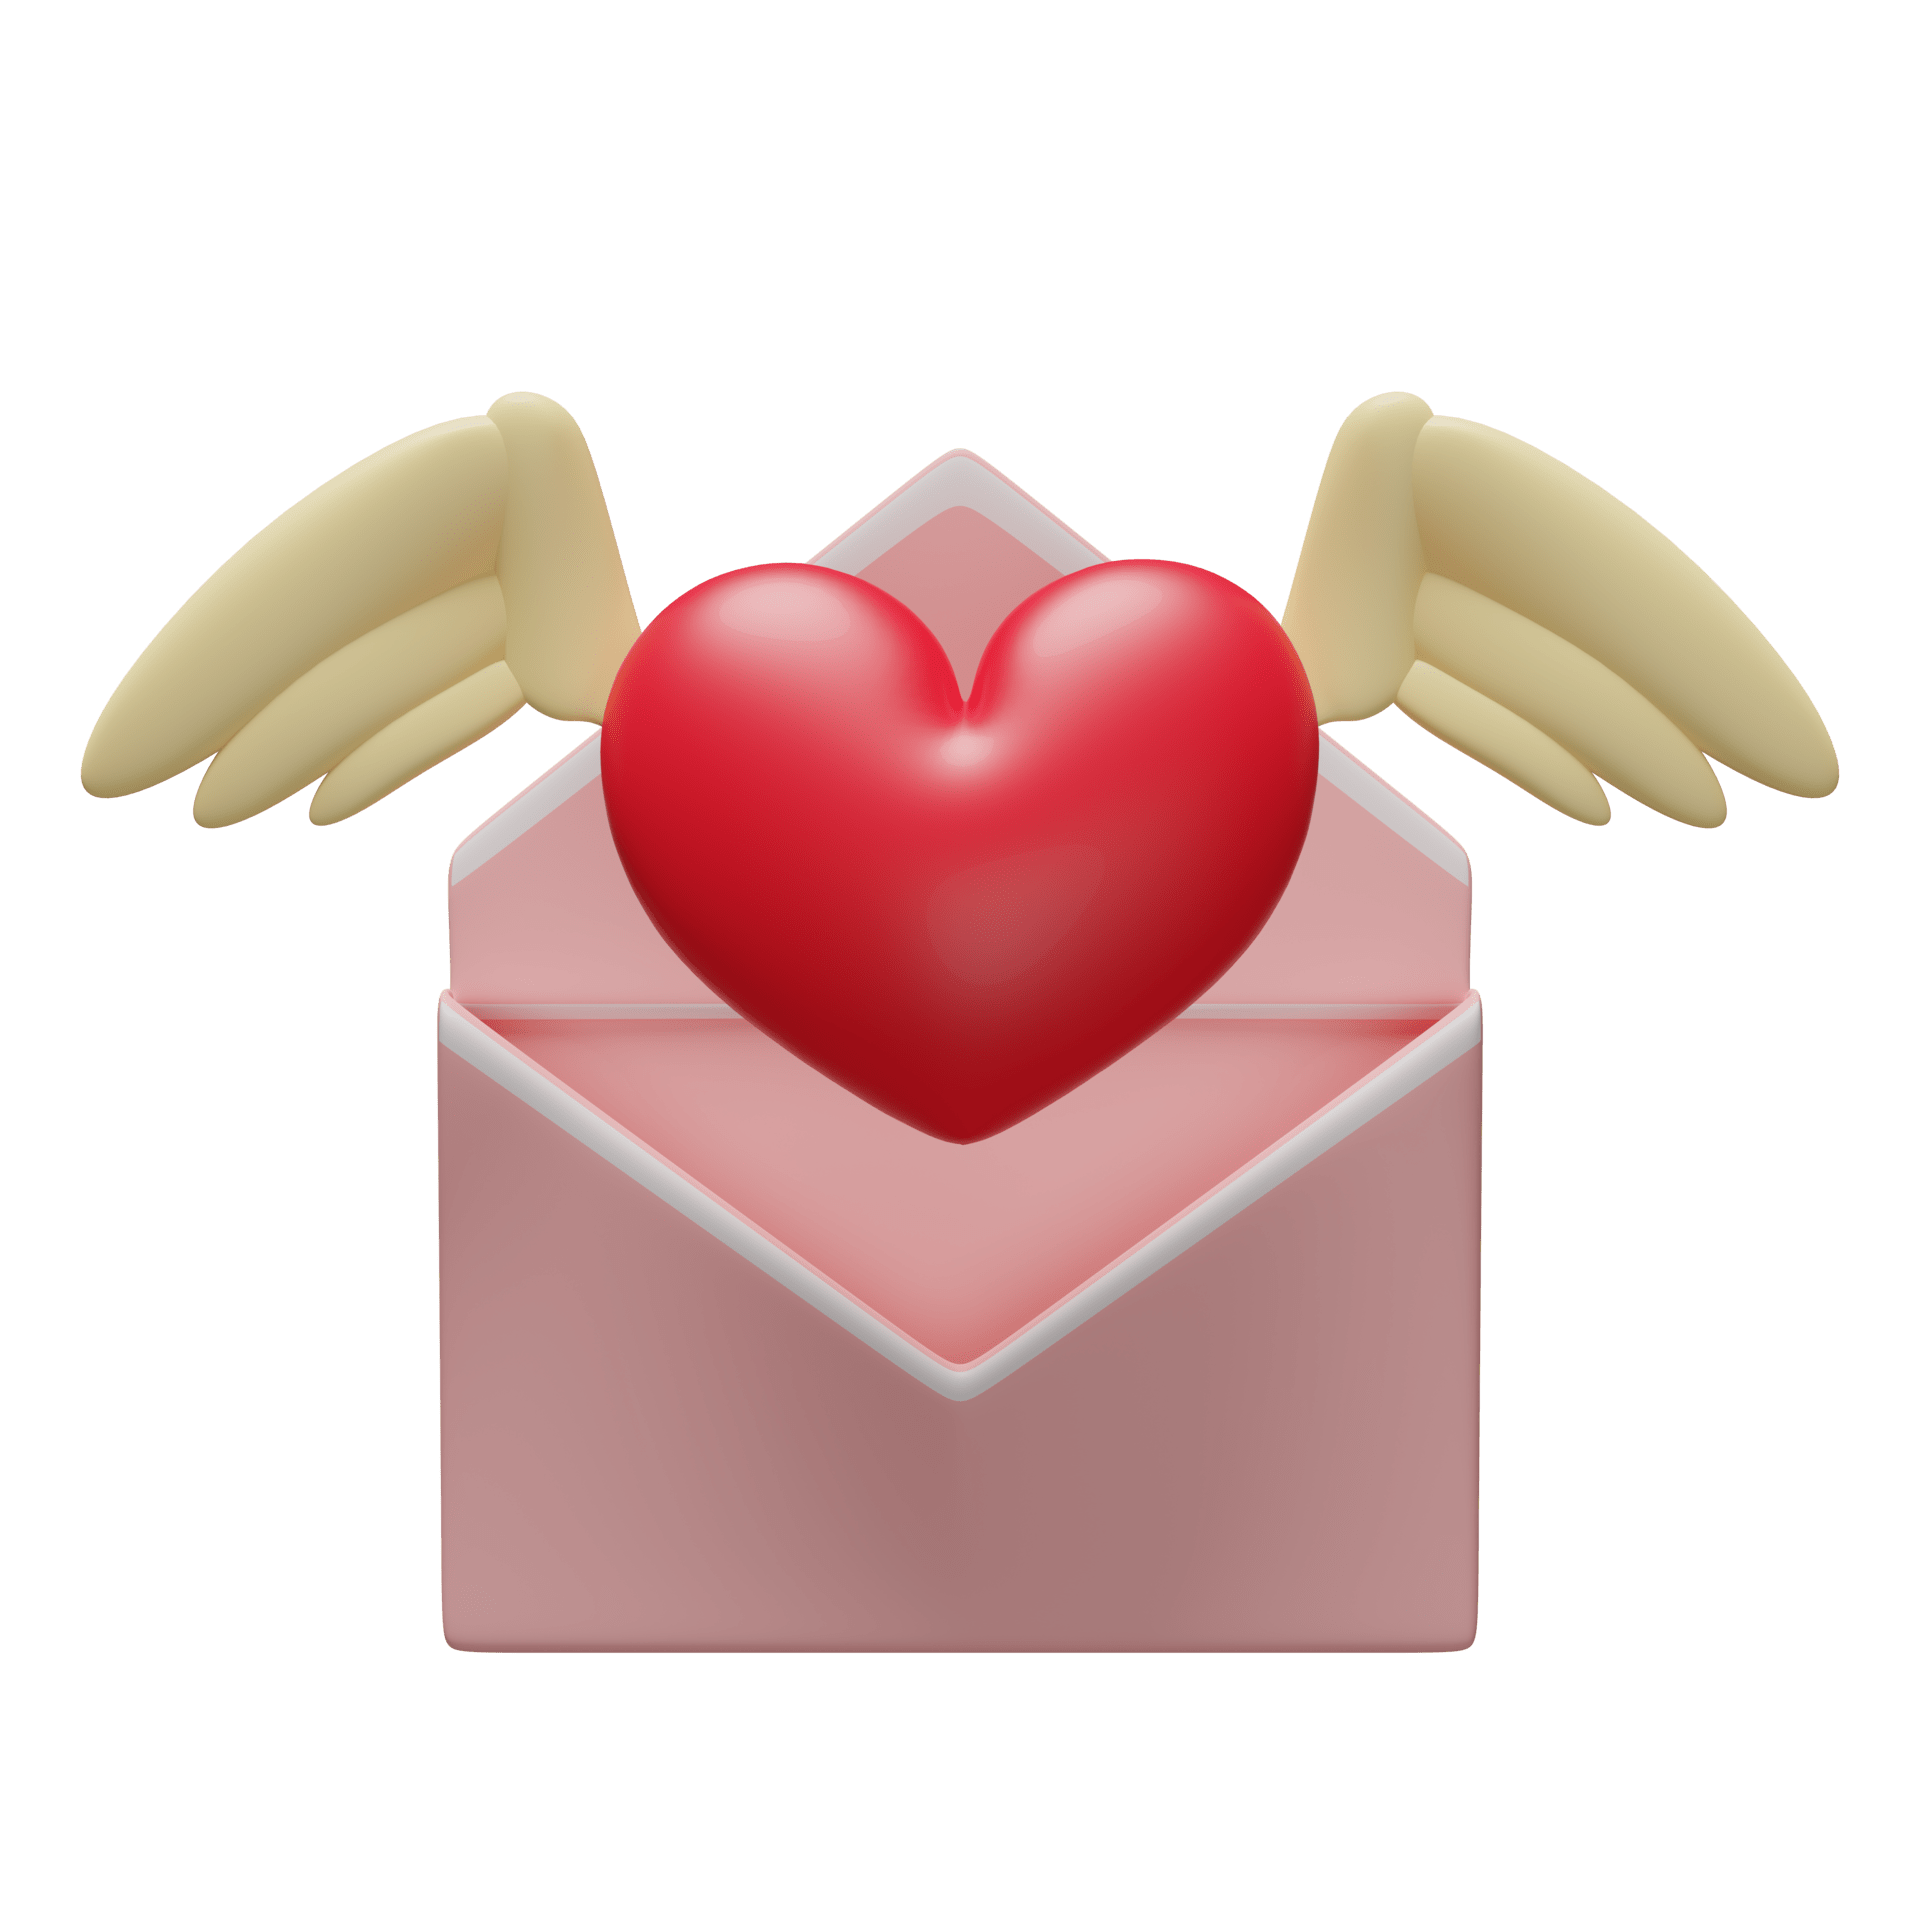 red-heart-with-wings-flying-envelope-isolated-notify-newsletter-online-incoming-email-health-love-or-world-heart-day-valentine-s-day-concept-3d-illustration-or-3d-render-png-min-1.png